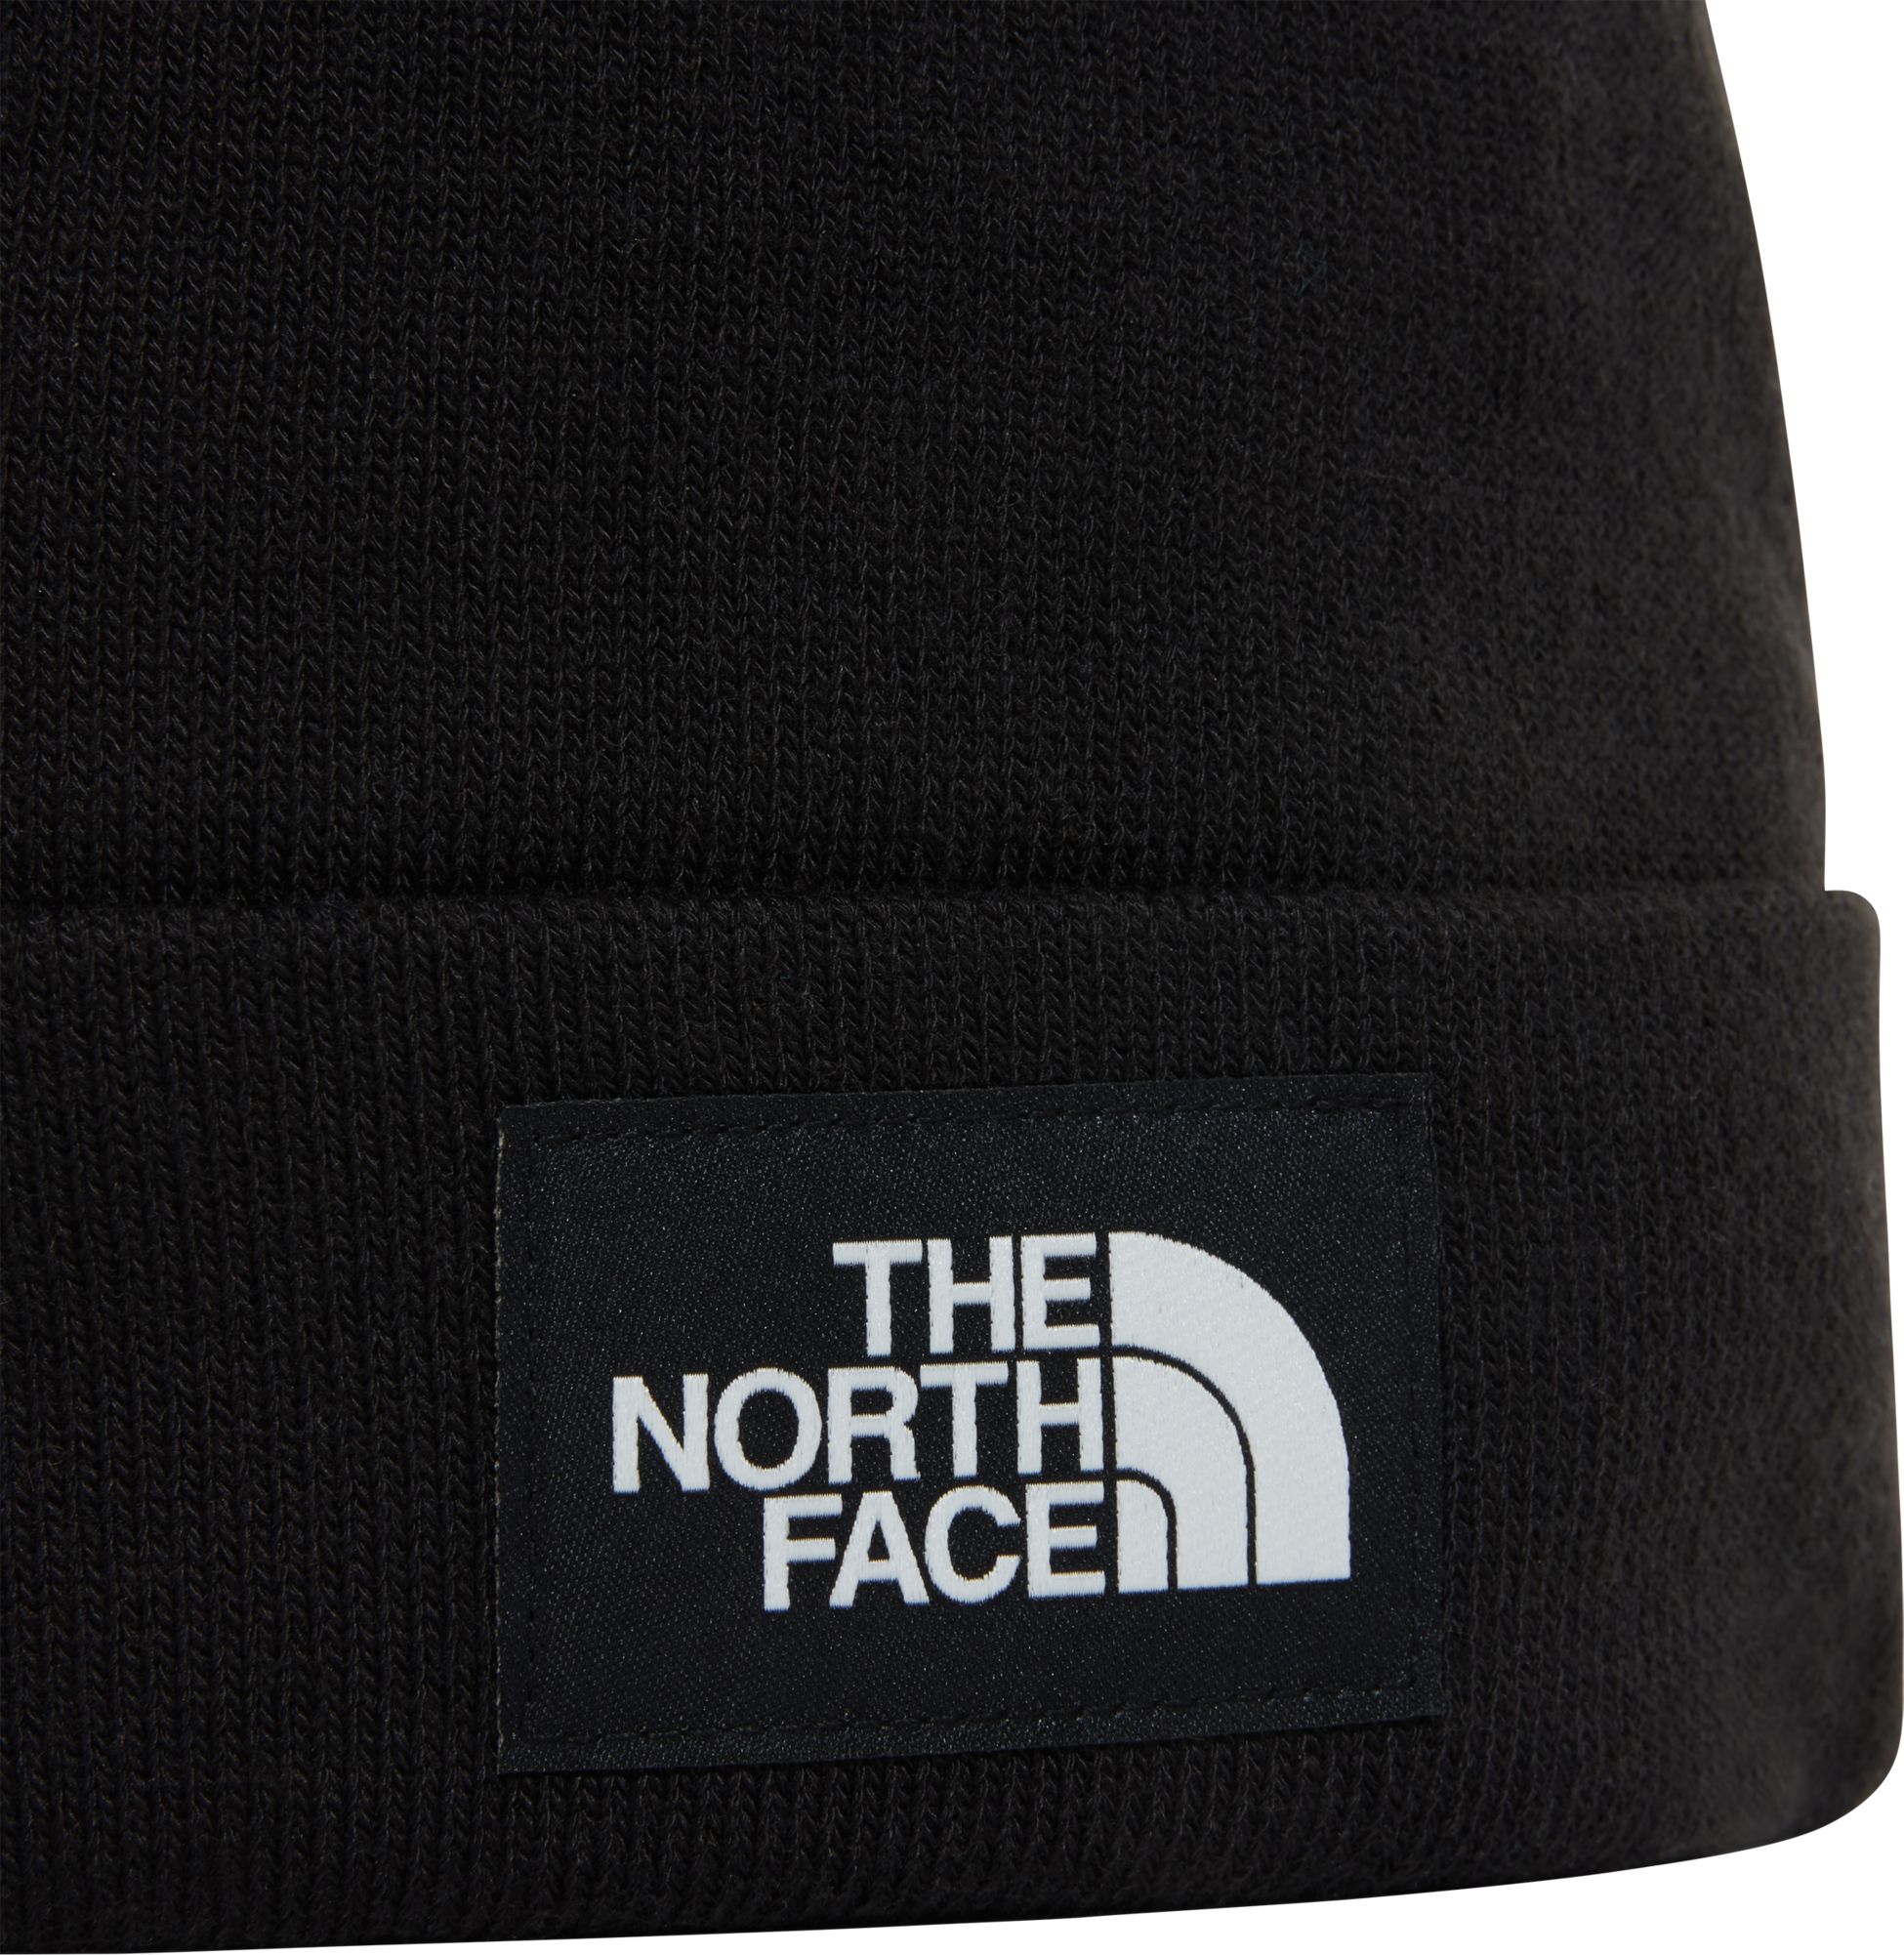 THE NORTH FACE, DOCK WORKER RECYCLED BEANIE 